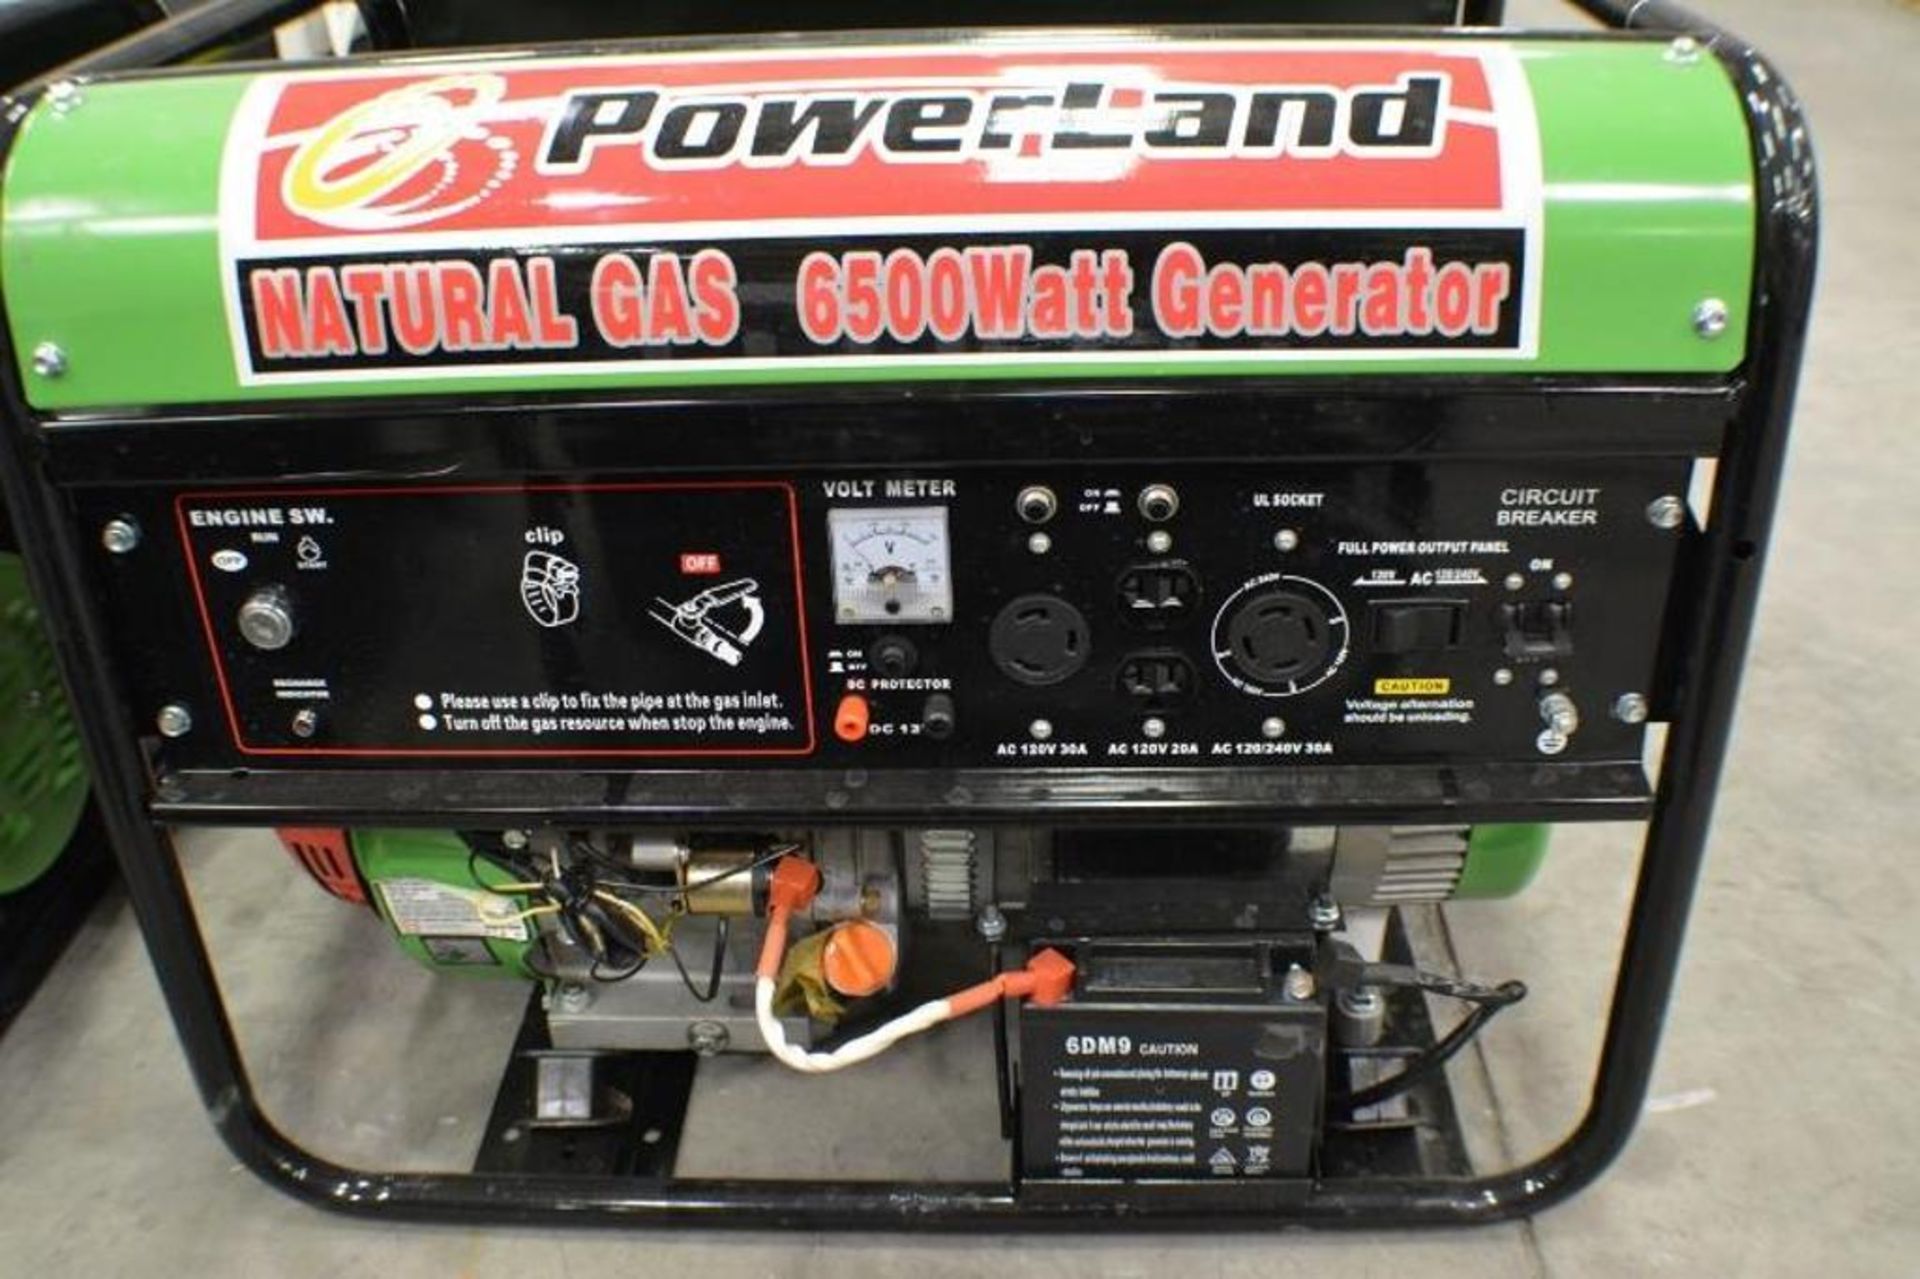 6500 Watts Natural Gas Generator 60Hz 16.0HP Single Phase 120/240Volts with Electric Start by Powerl - Image 2 of 6